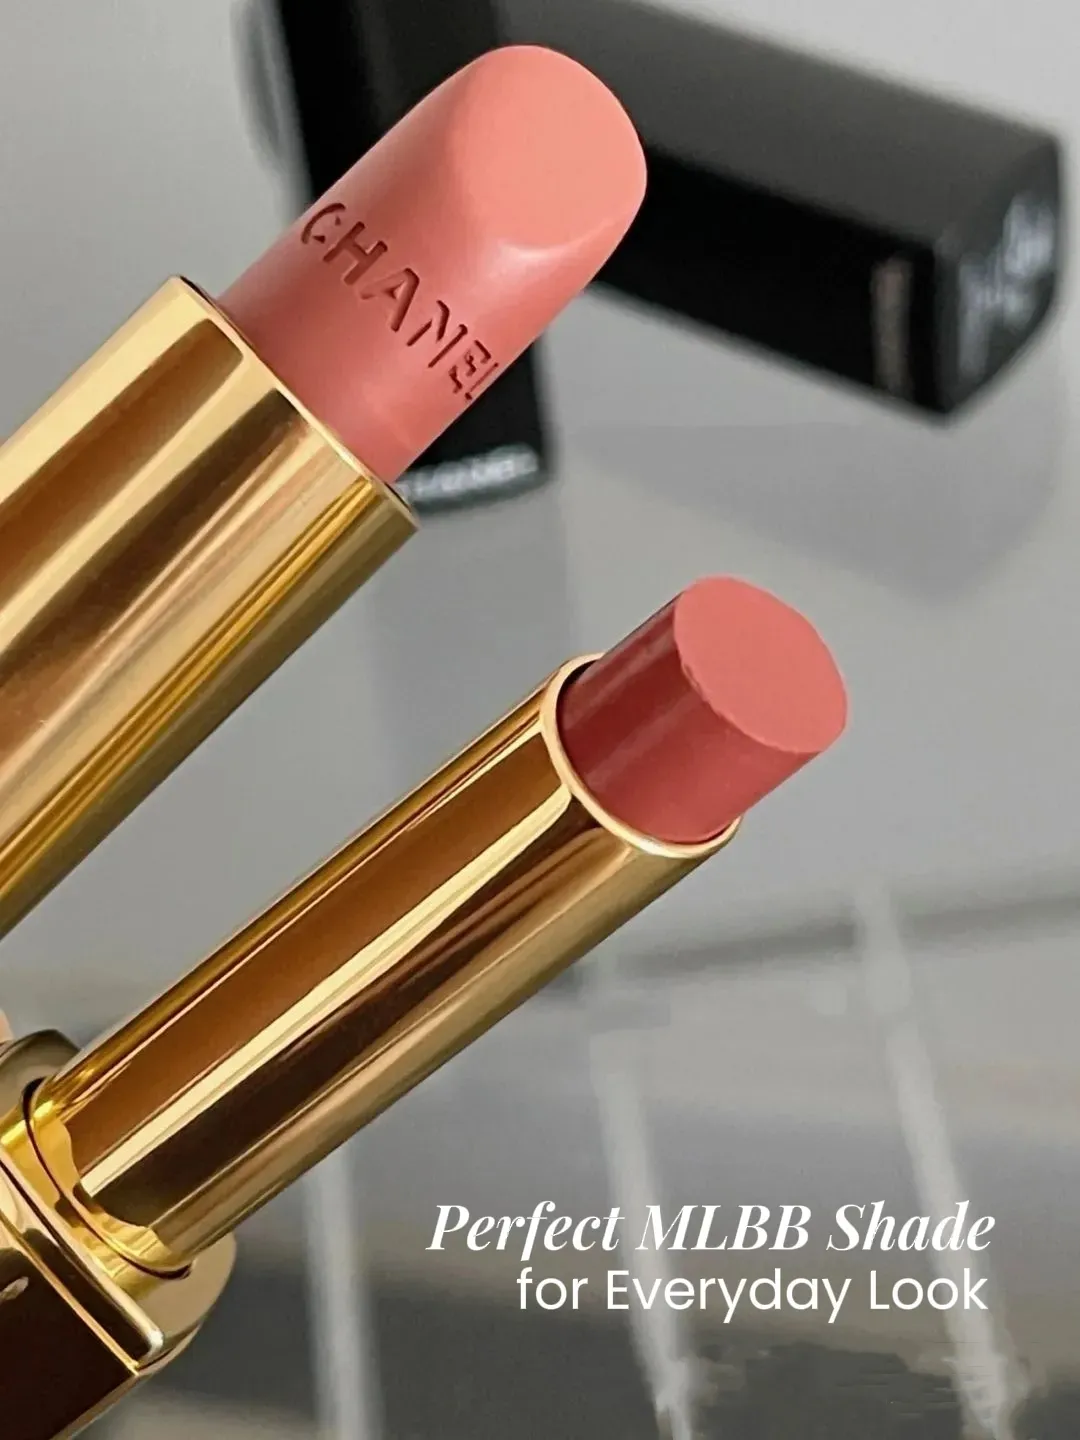 Perfect MLBB Shade for Everyday Look, Gallery posted by aliana marìe